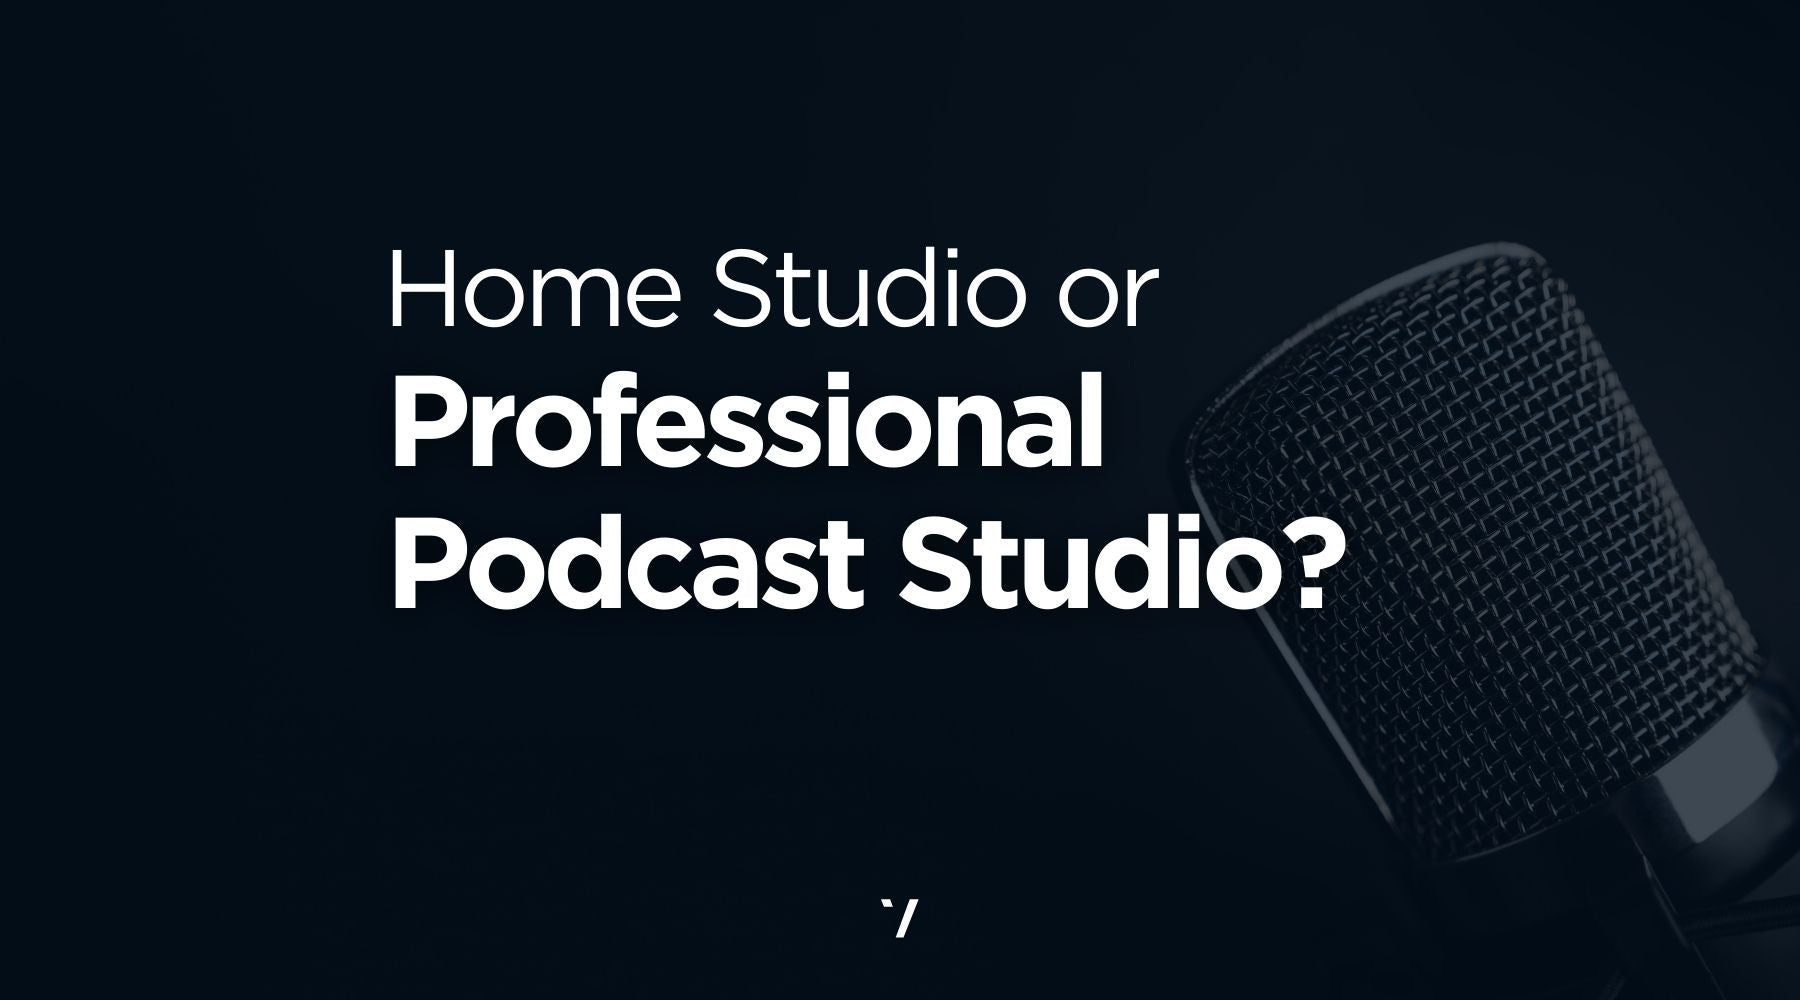 Home Studio vs. Professional Podcast Studio: Which One Suits Your Vision?